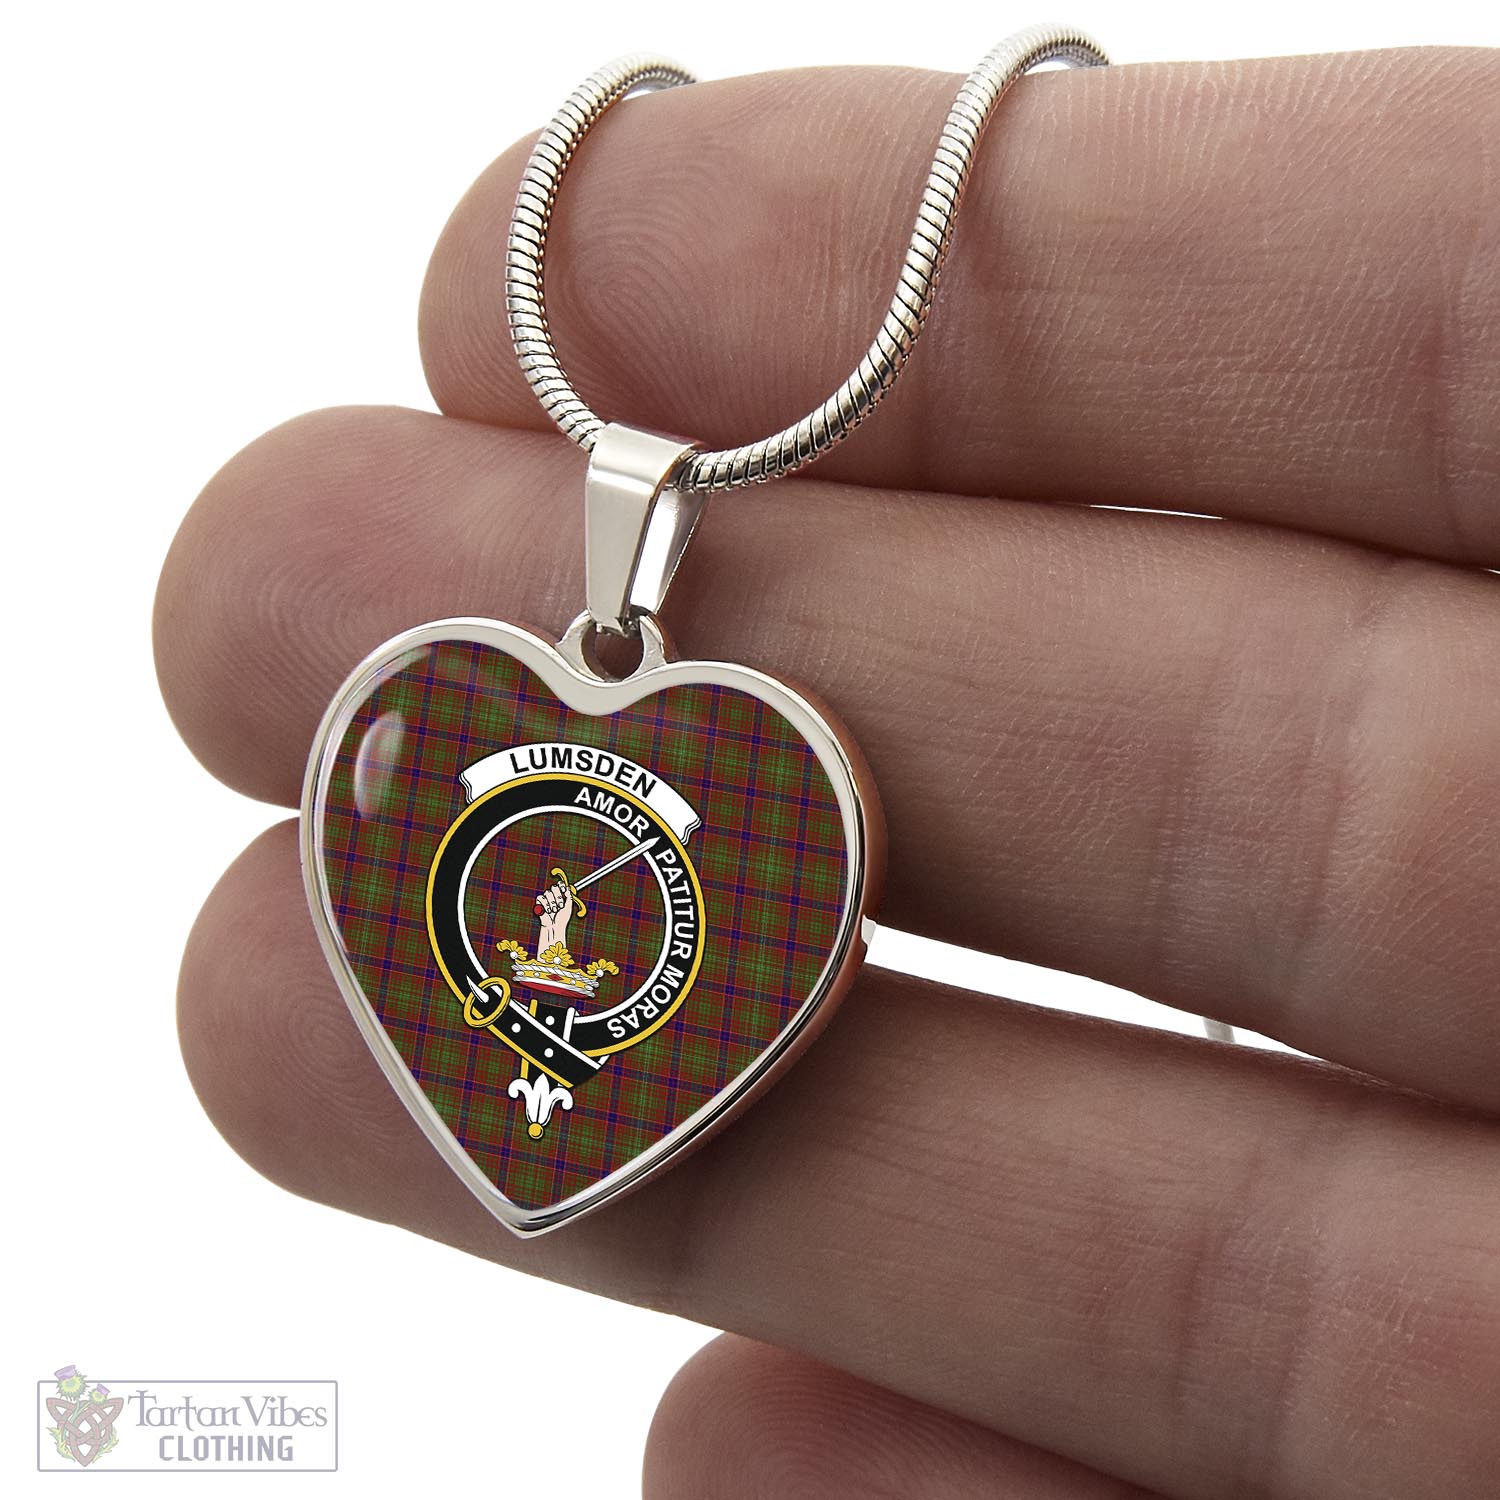 Tartan Vibes Clothing Lumsden Tartan Heart Necklace with Family Crest